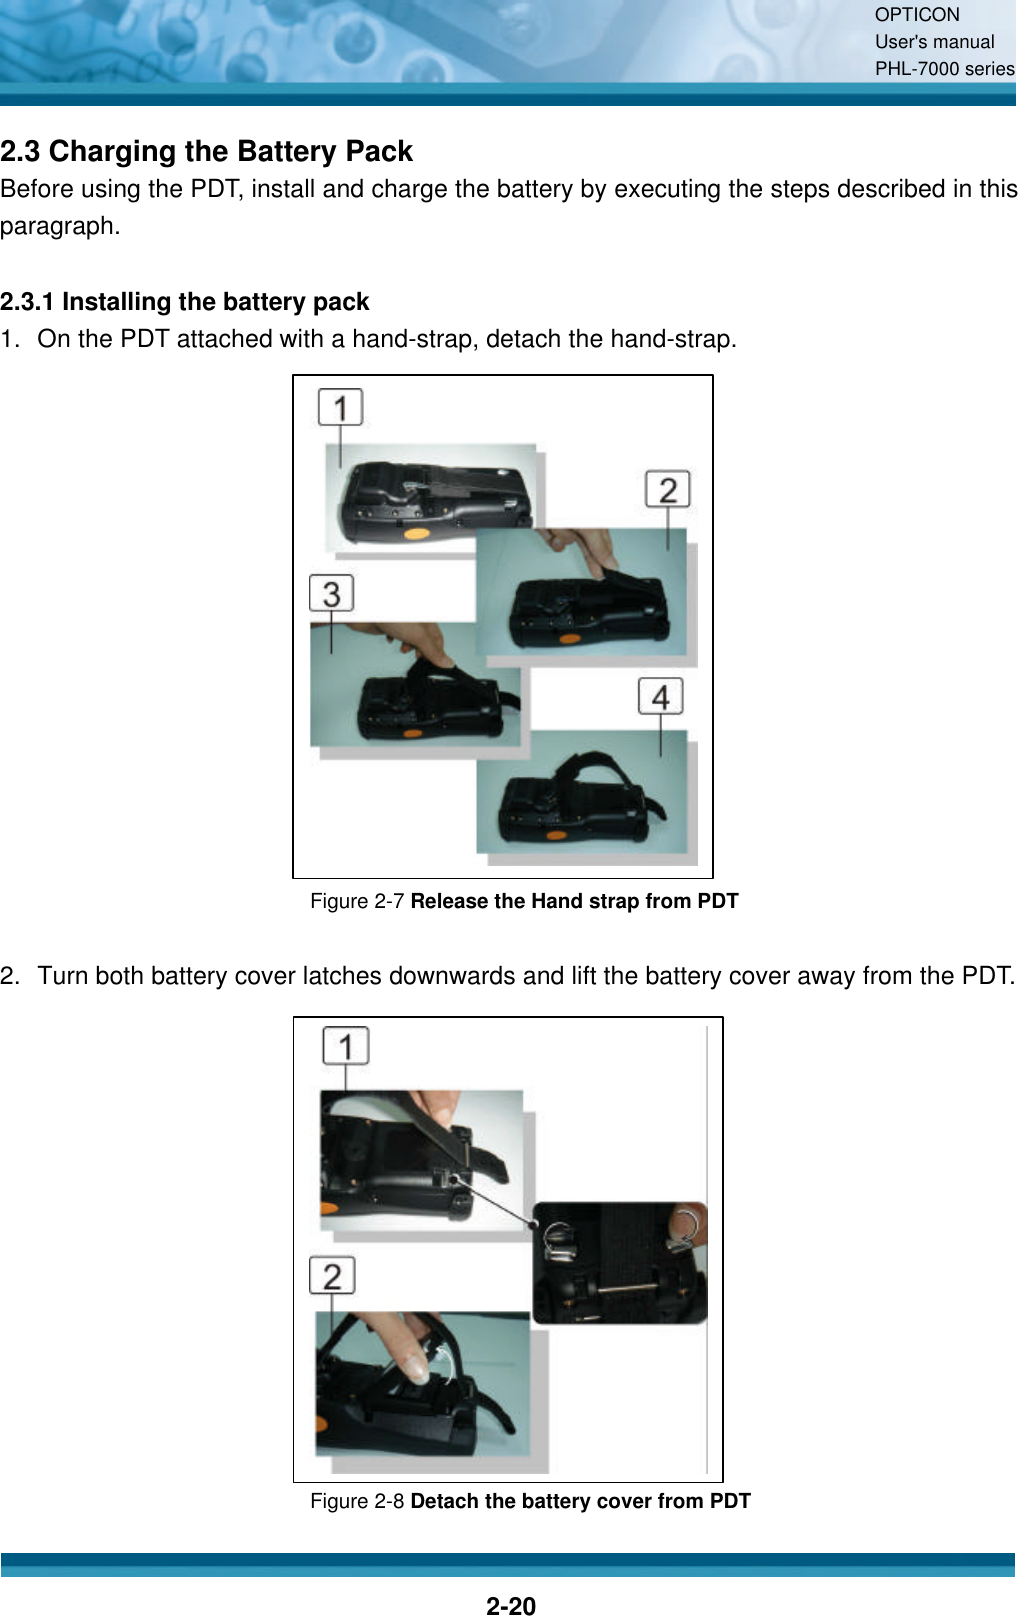 OPTICON User&apos;s manual PHL-7000 series    2-20 2.3 Charging the Battery Pack Before using the PDT, install and charge the battery by executing the steps described in this paragraph.  2.3.1 Installing the battery pack 1. On the PDT attached with a hand-strap, detach the hand-strap.               Figure 2-7 Release the Hand strap from PDT  2. Turn both battery cover latches downwards and lift the battery cover away from the PDT.              Figure 2-8 Detach the battery cover from PDT  